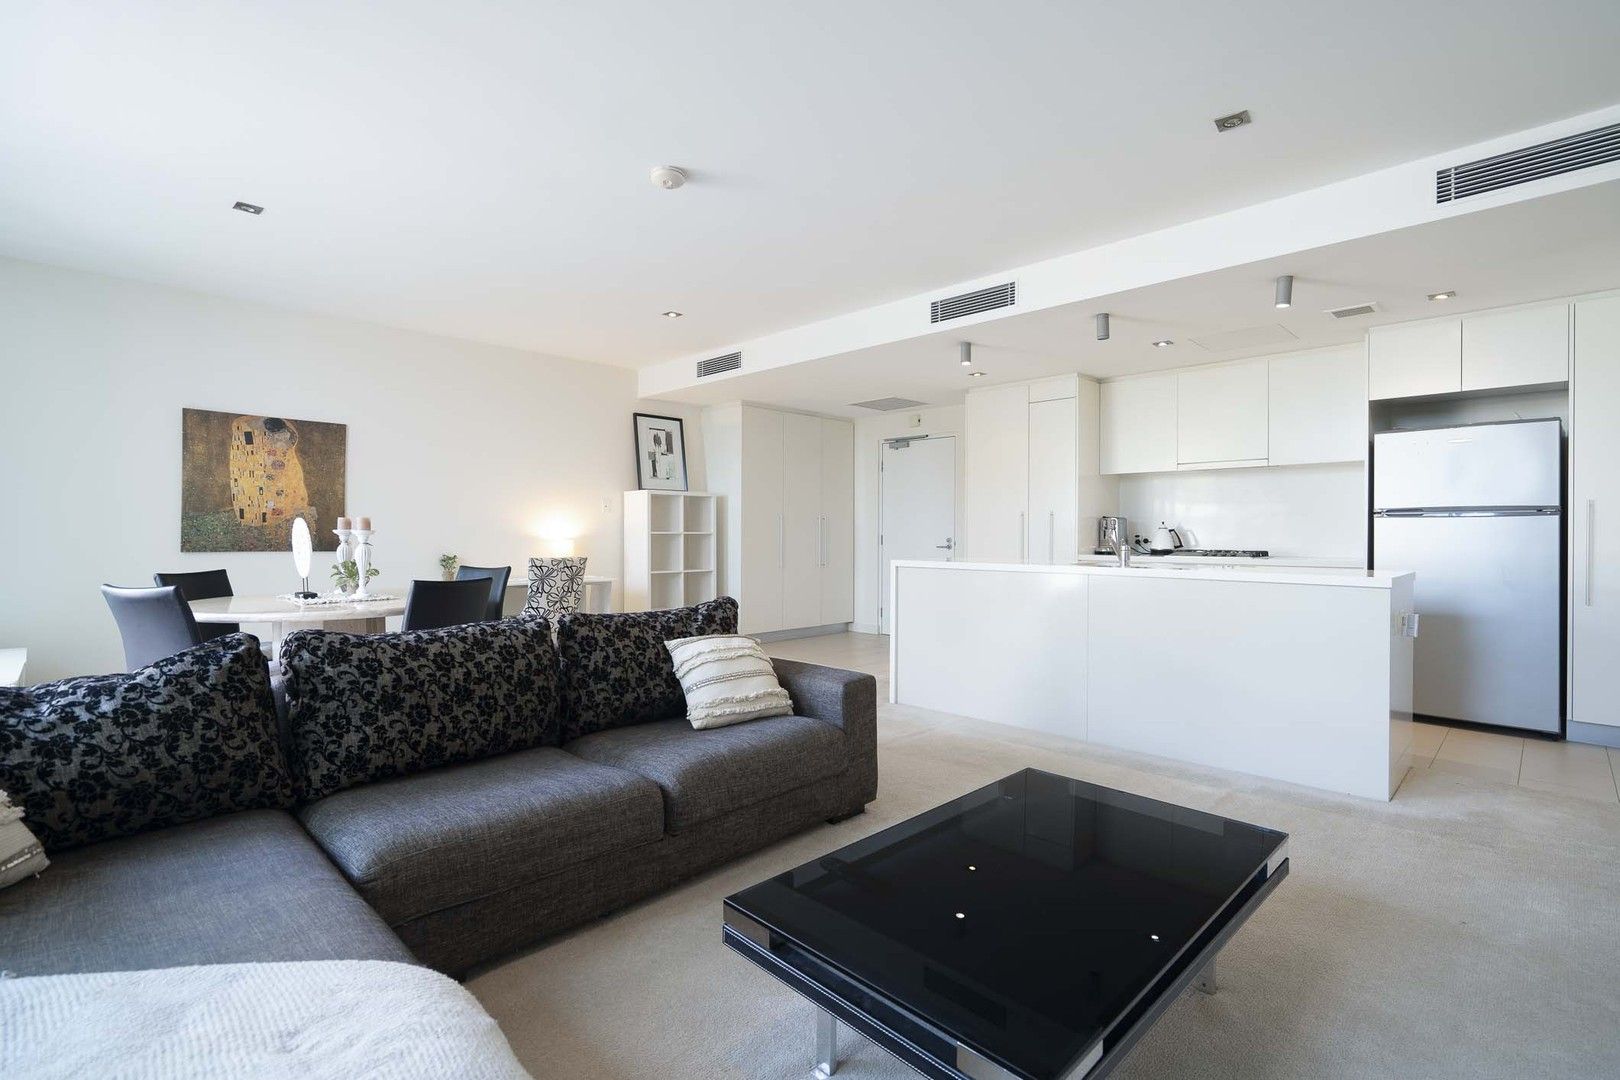 2 bedrooms Apartment / Unit / Flat in 404/2 Bovell Lane CLAREMONT WA, 6010